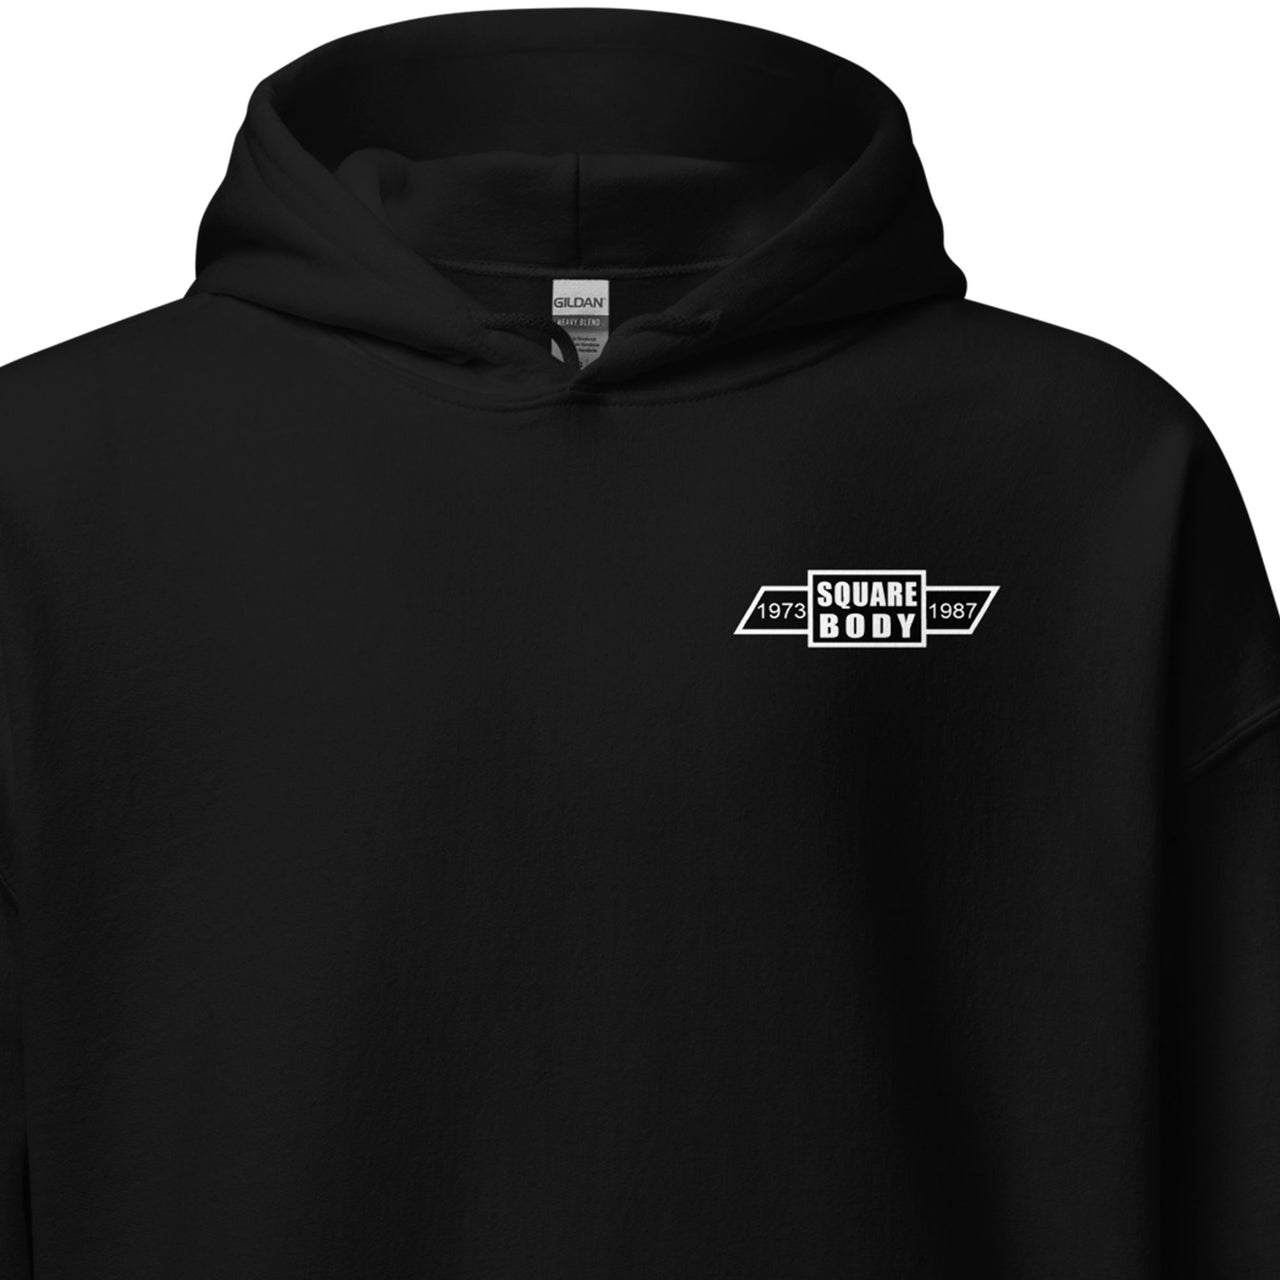 1973-1987 Square Body Grilles Hoodie in black close up of front design